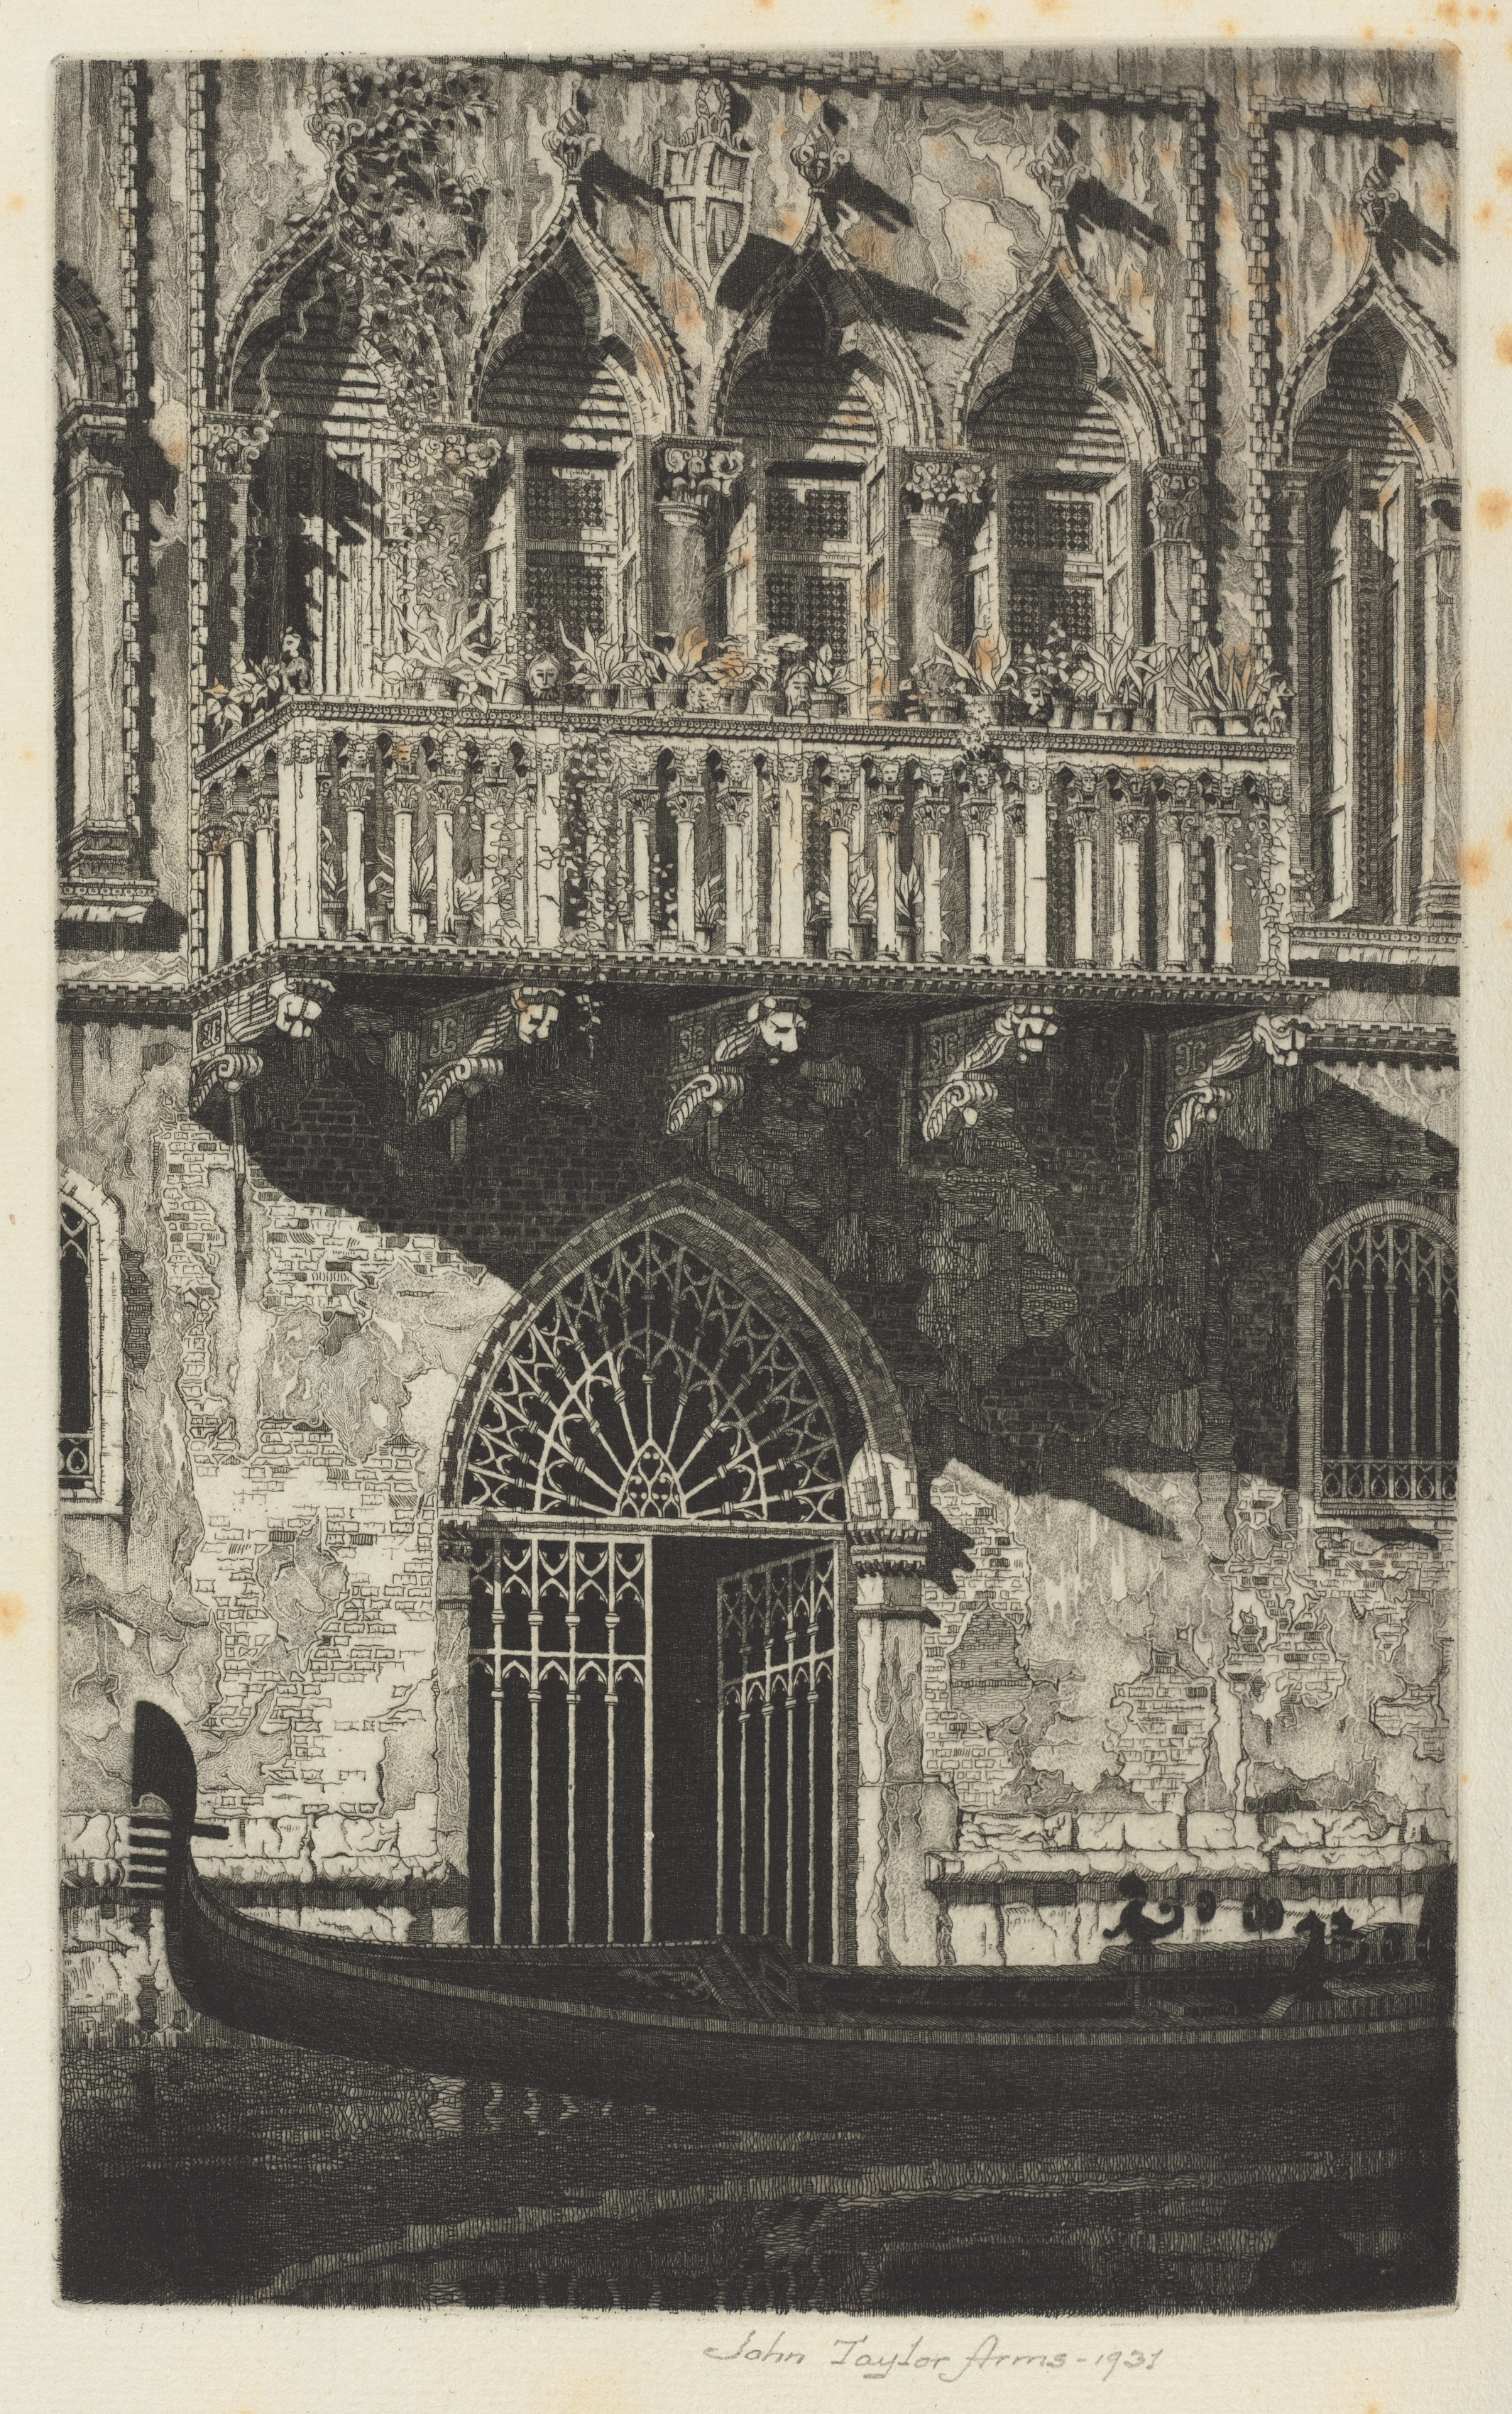 Hill Towns and Cities of Northern Italy: Frontispiece, The Balcony